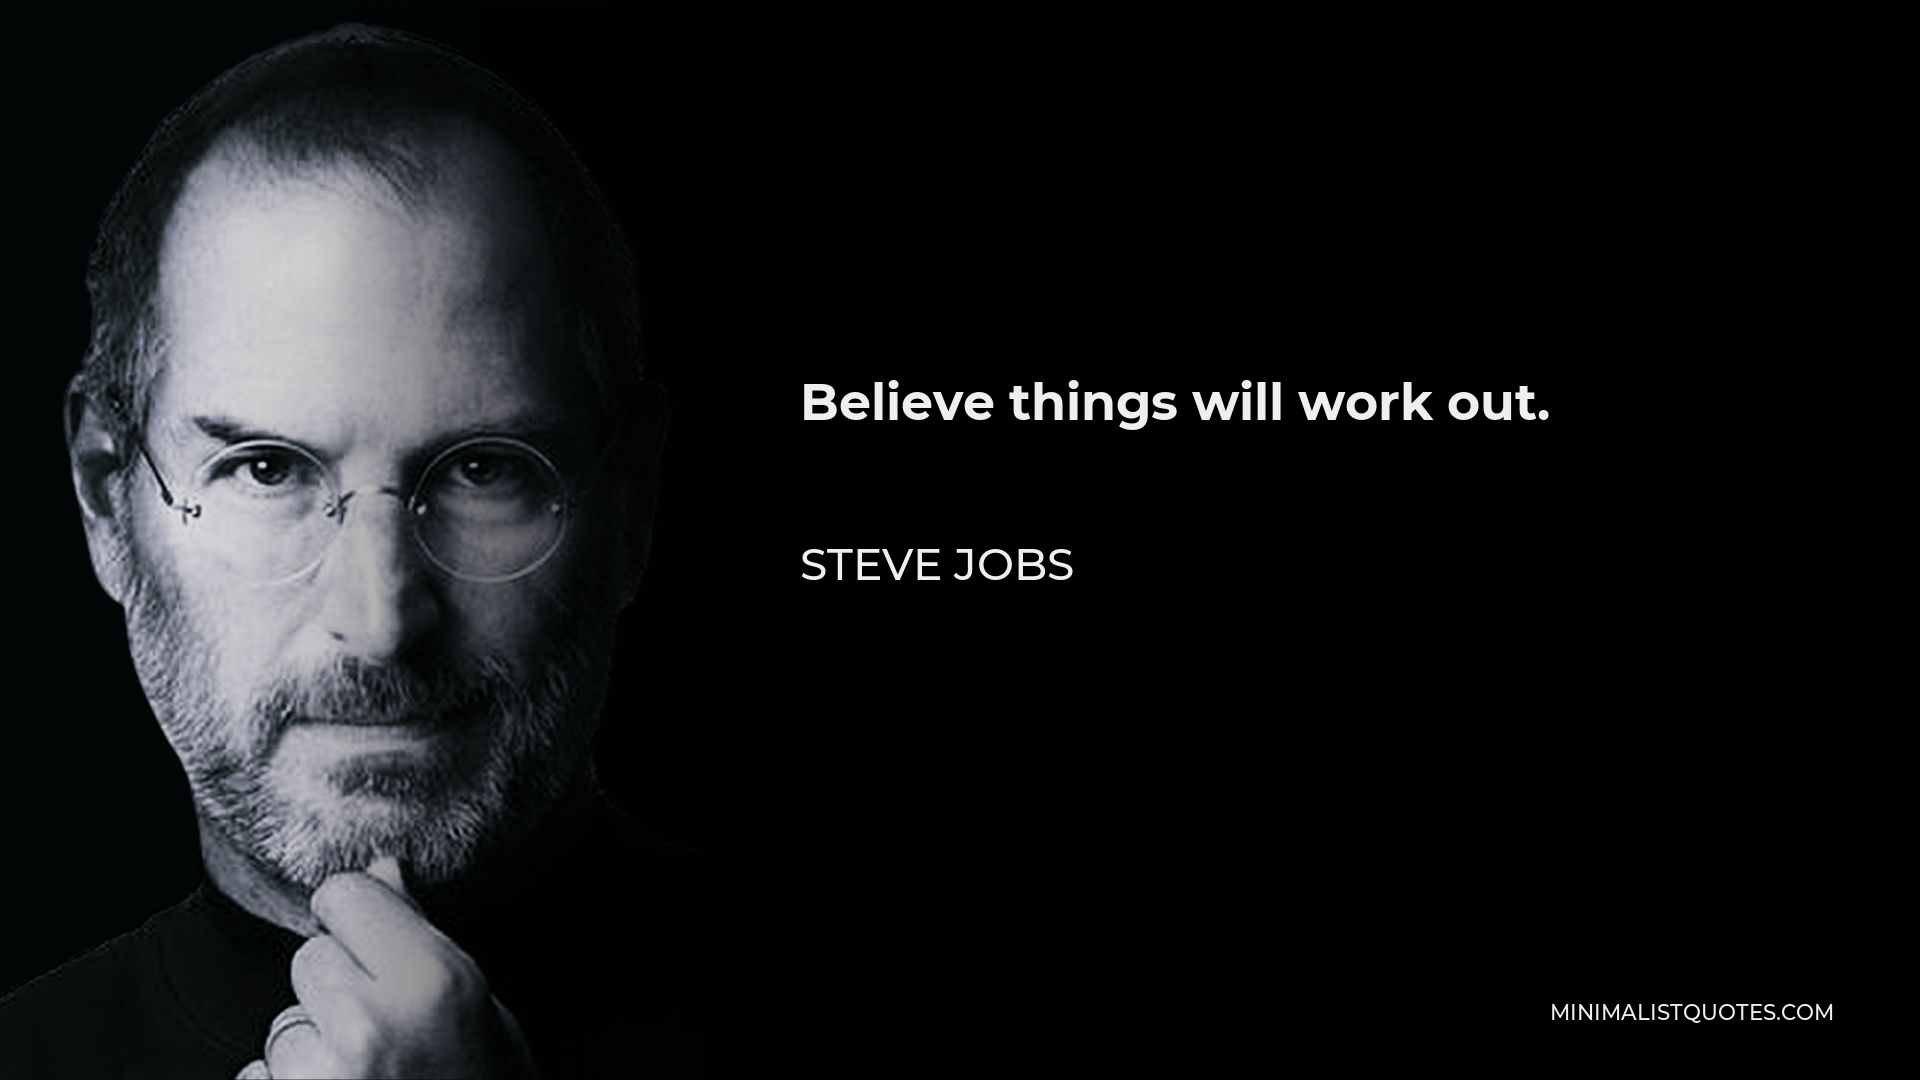 Steve Jobs Quote - Believe things will work out.